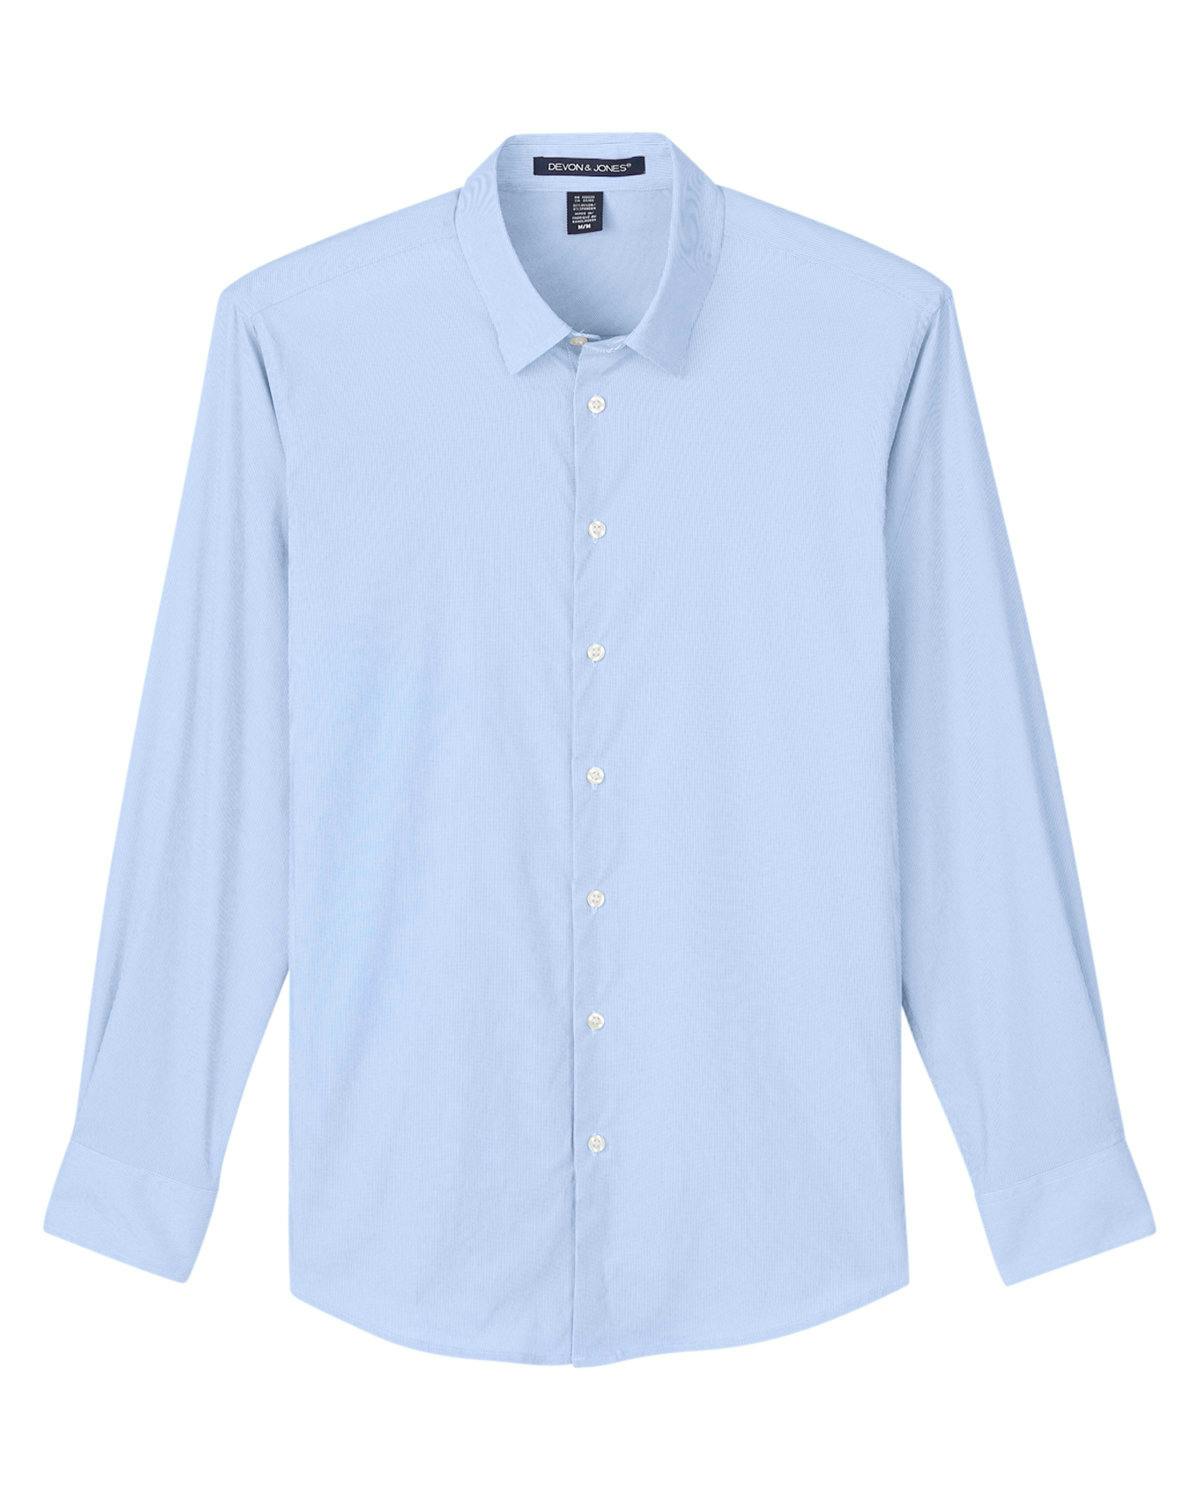 Image for CrownLux Performance® Men's Microstripe Shirt